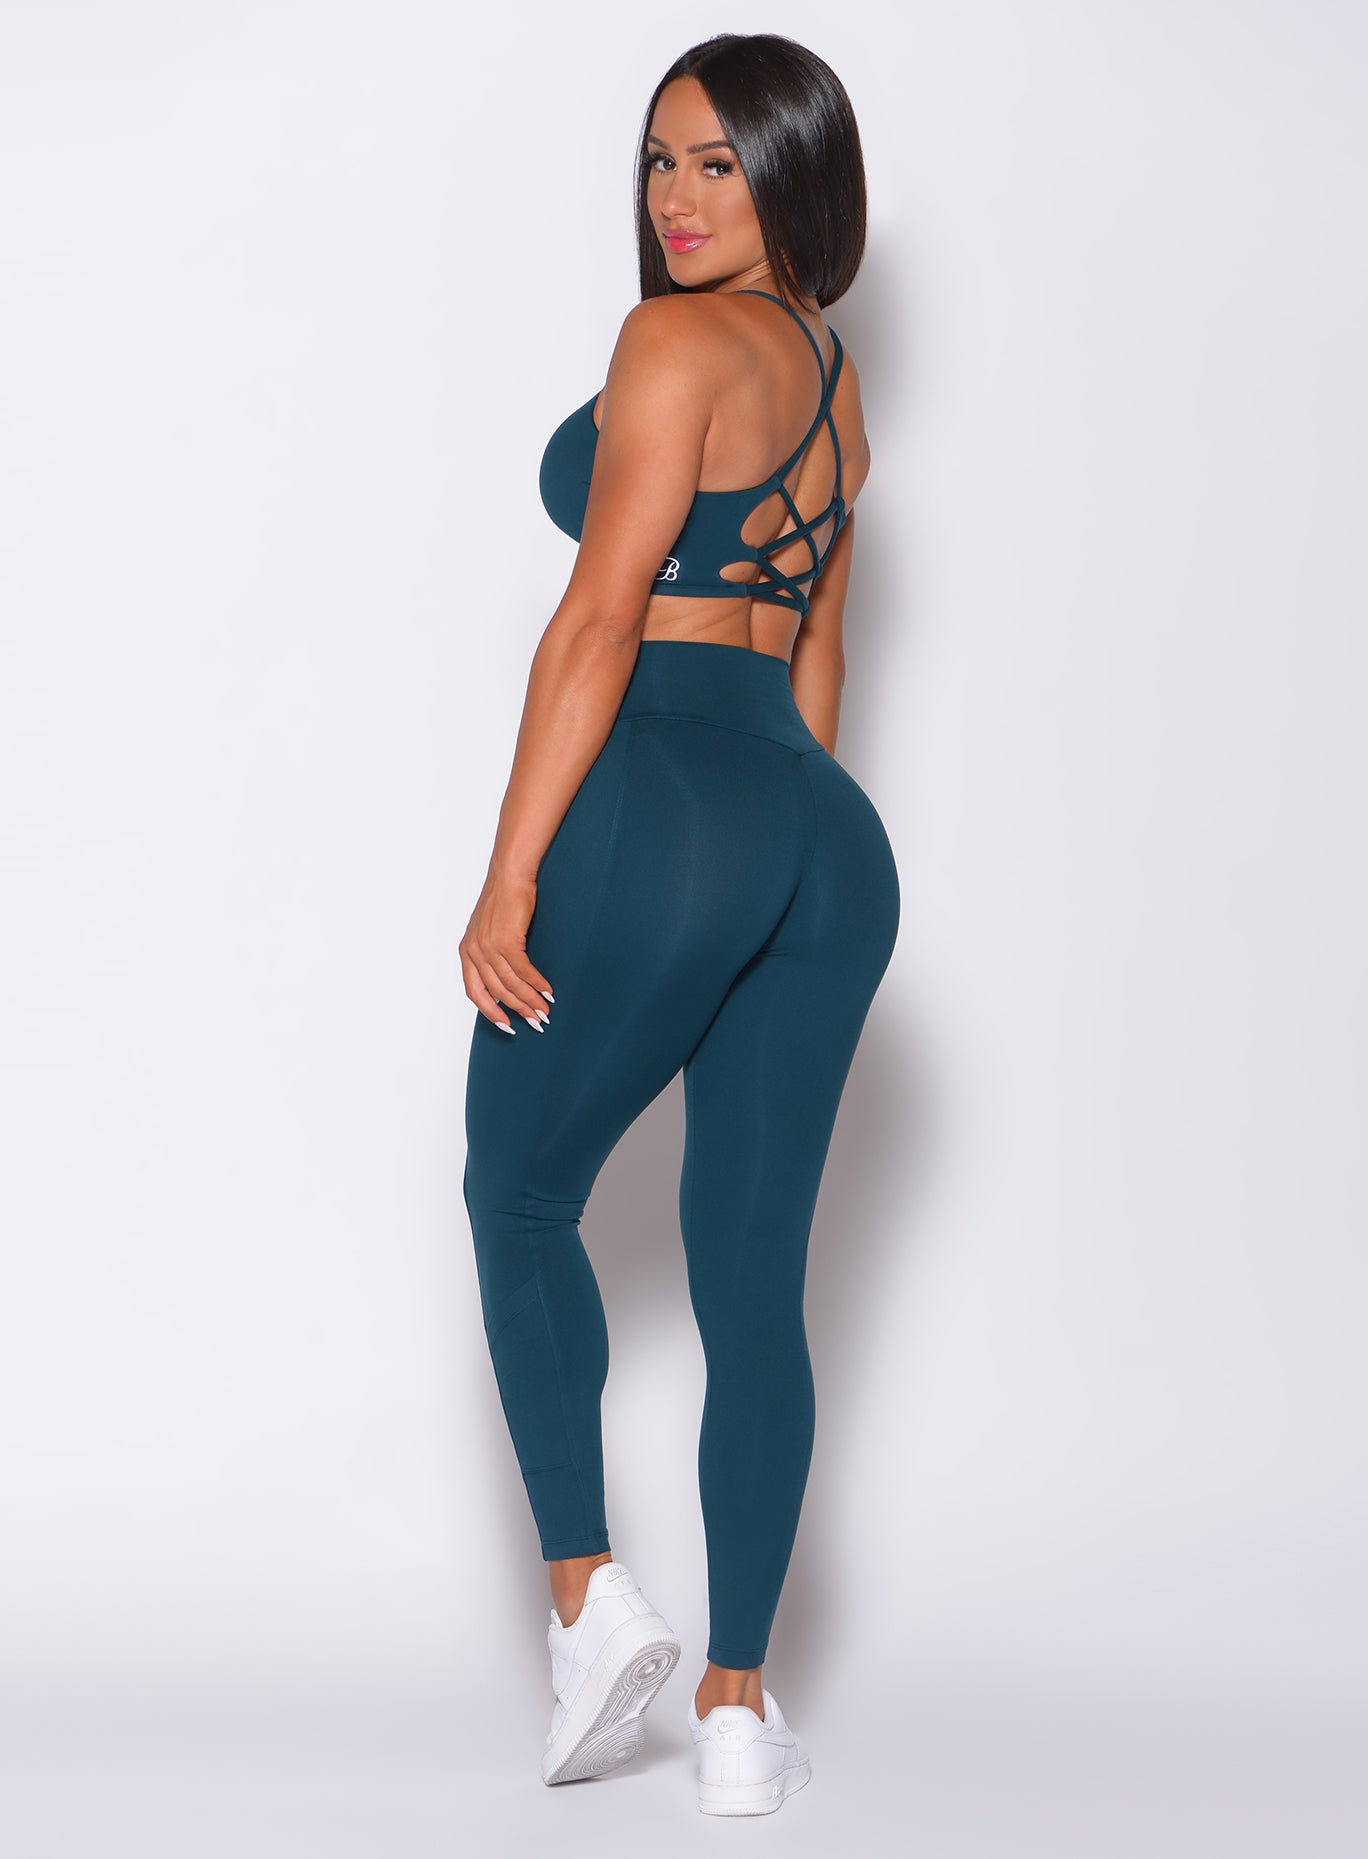 Left side profile view of a model in our empower leggings in peacock color and a matching bra